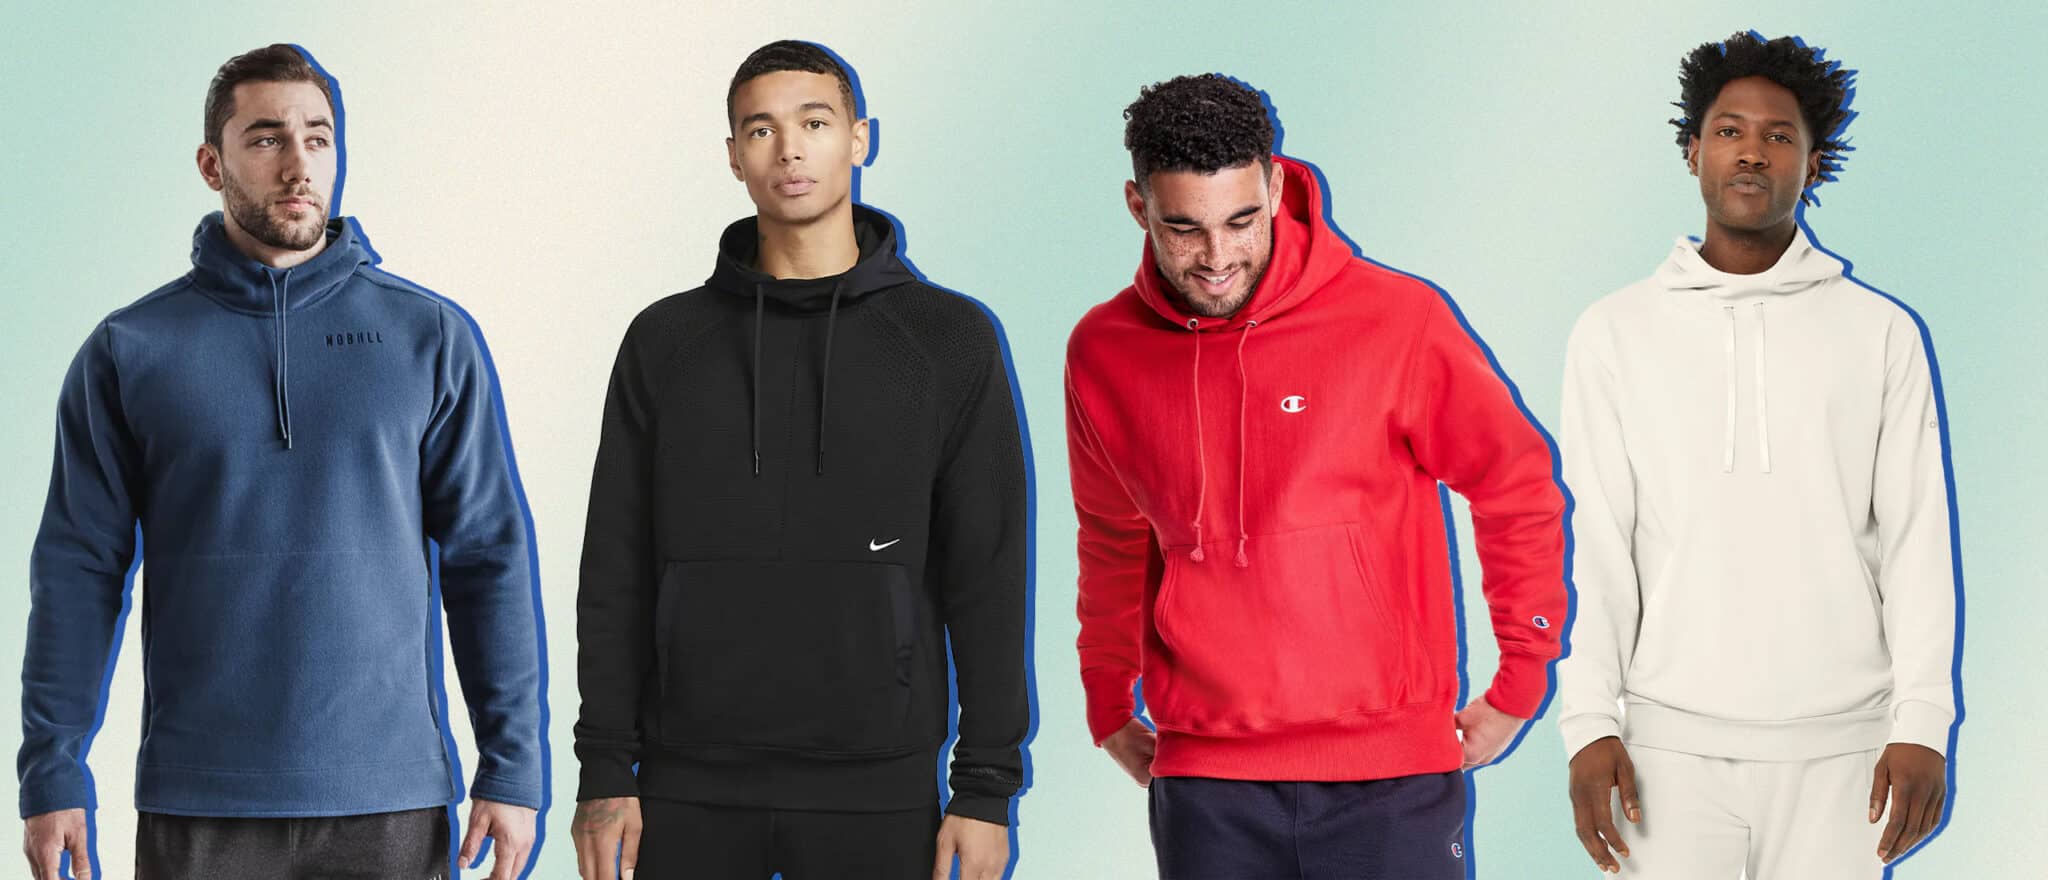 It’s Always Gym Hoodie Season. Here Are the Best You Can Buy